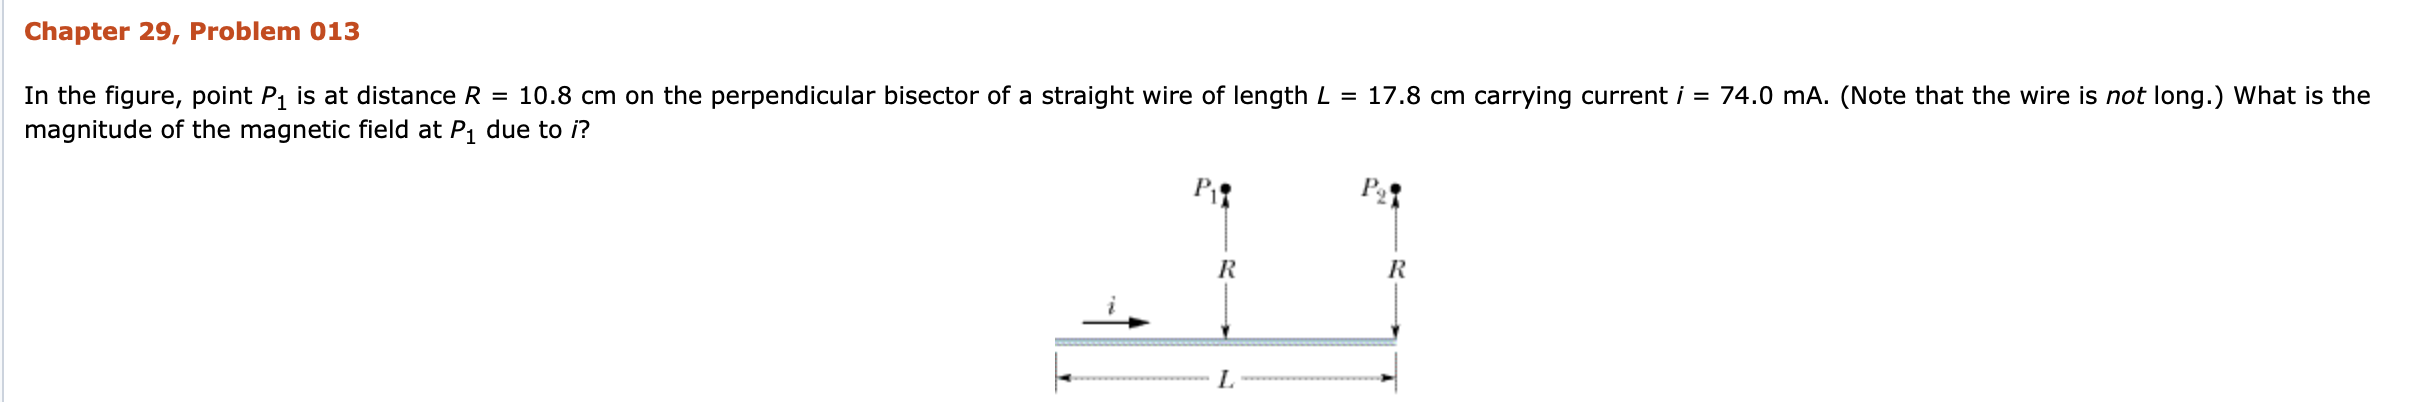 Chapter 29, Problem 013
In the figure, point P1 is at distance R = 10.8 cm on the perpendicular bisector of a straight wire of length L = 17.8 cm carrying current i = 74.0 mA. (Note that the wire is not long.) What is the
magnitude of the magnetic field at P1 due to i?
